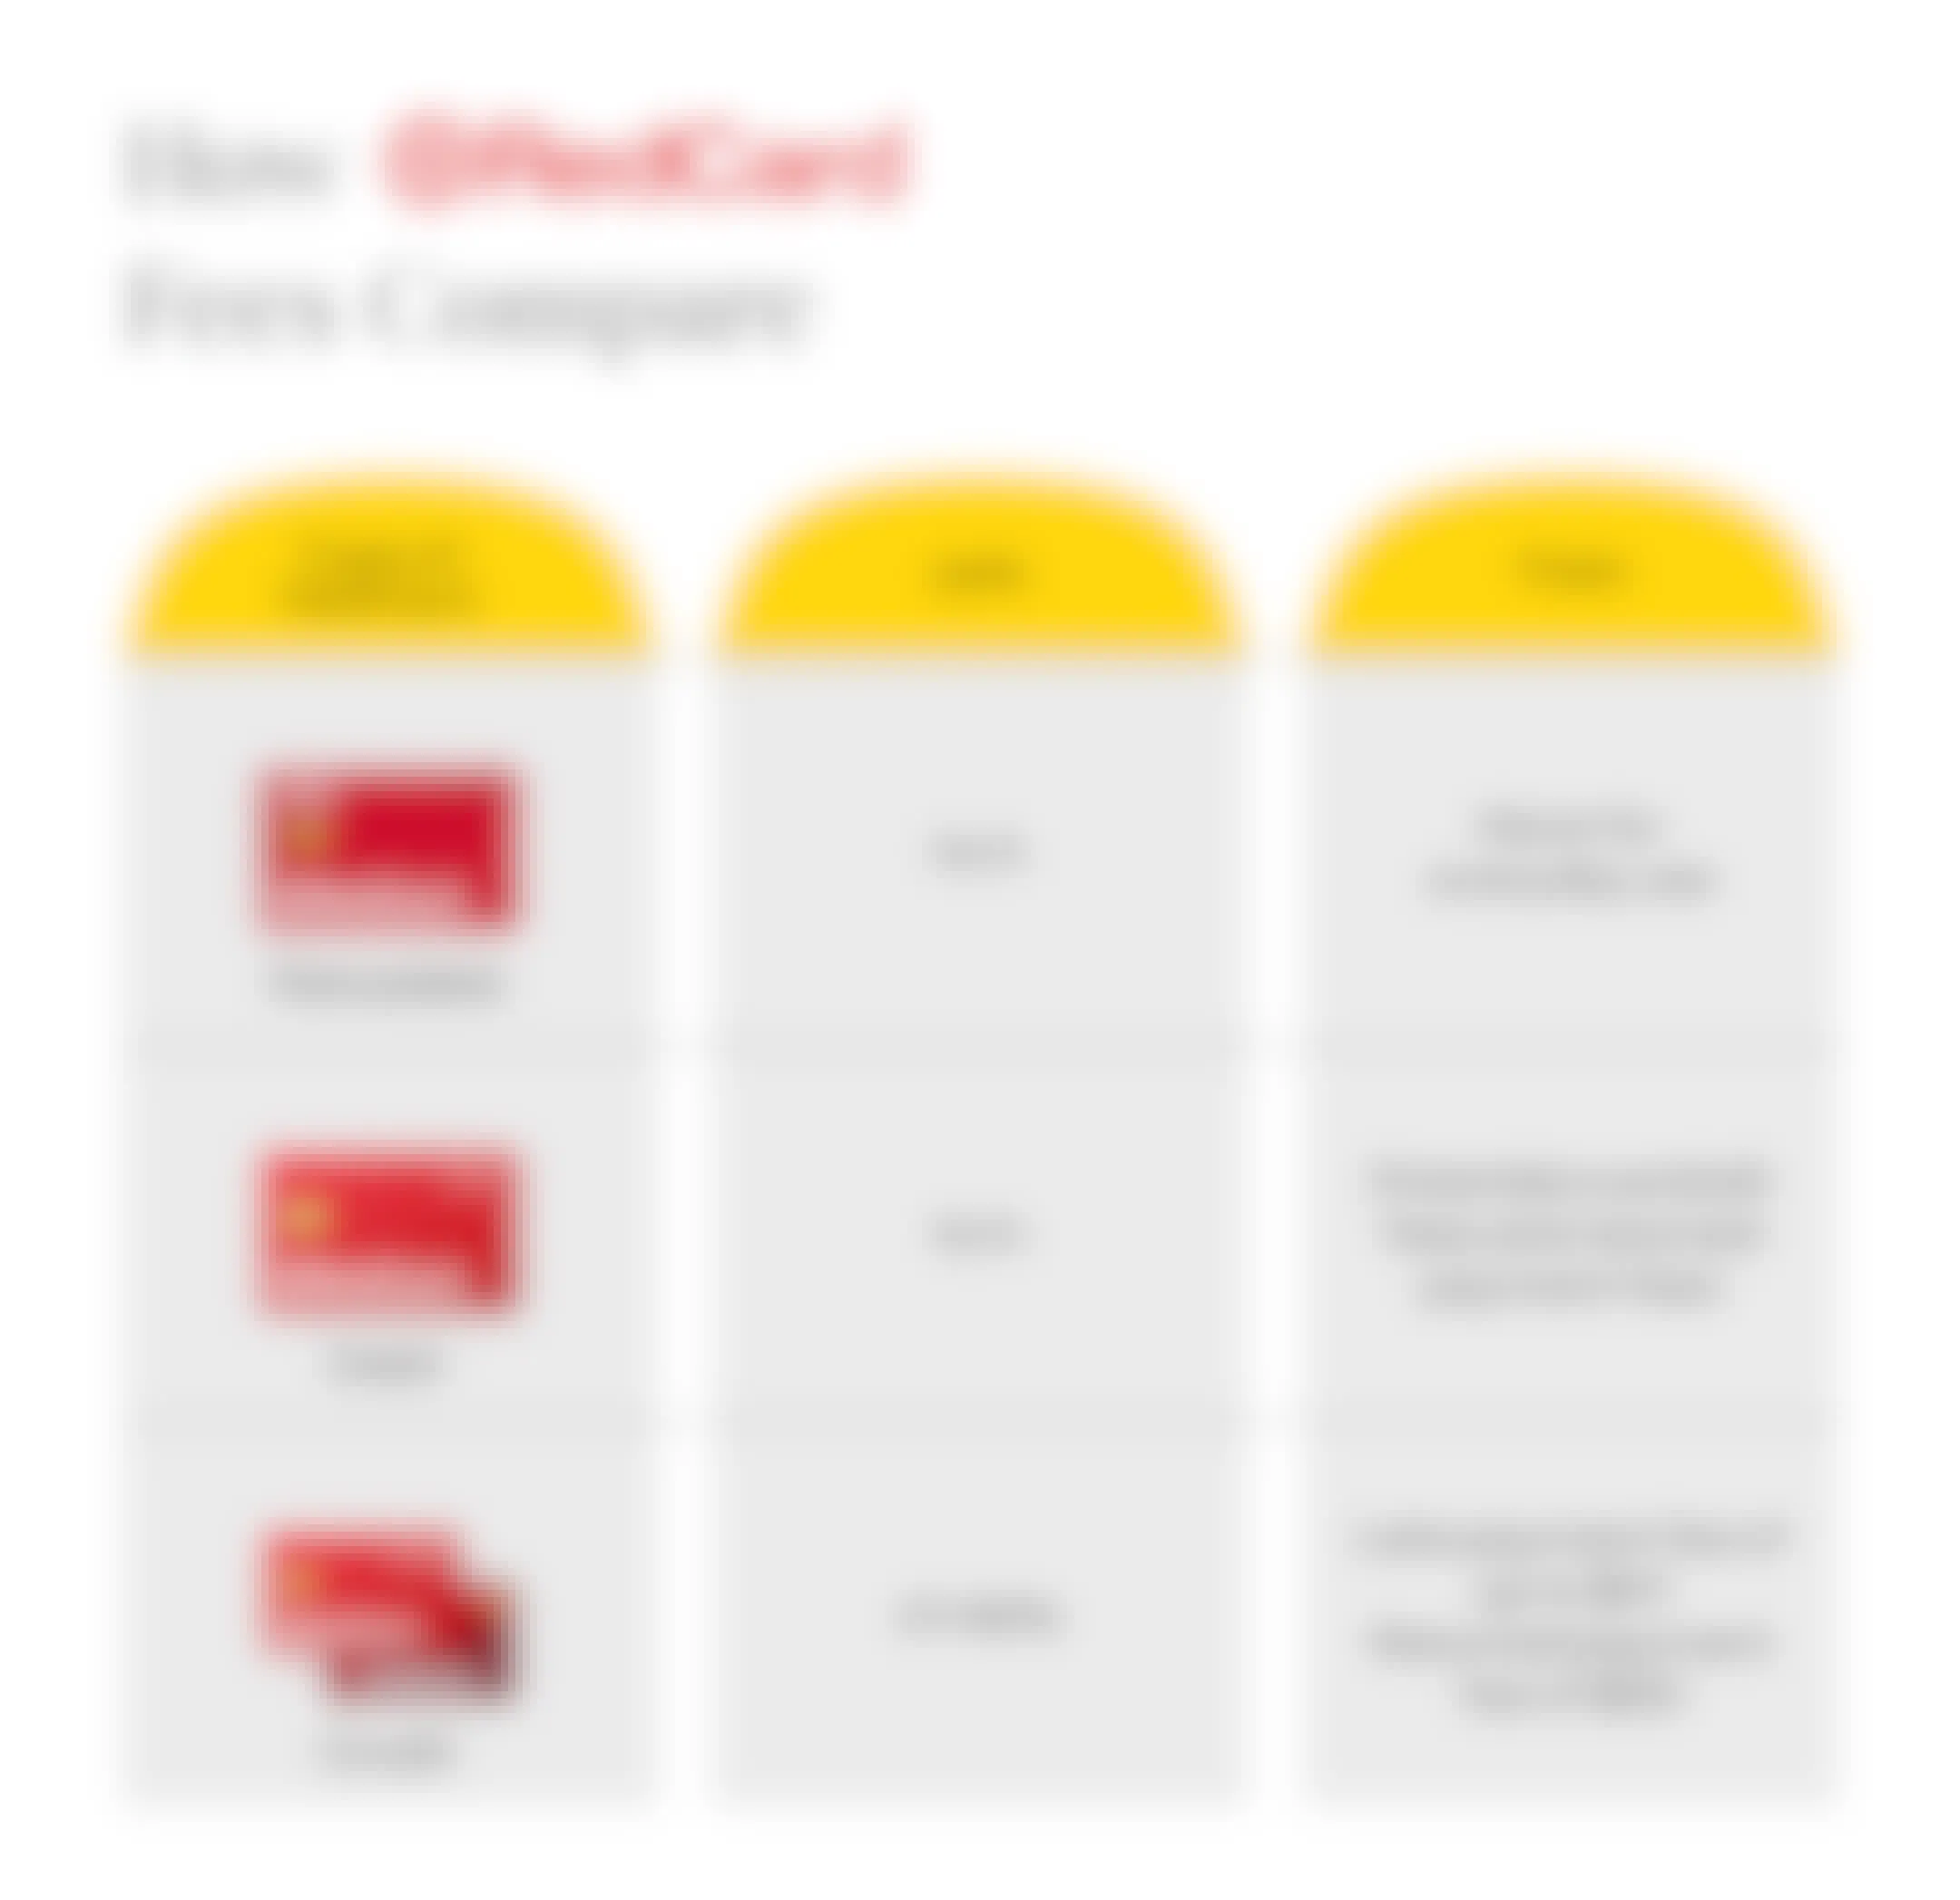 graphic showing how target redcard fees compare across reloadable, debit, and credit cards